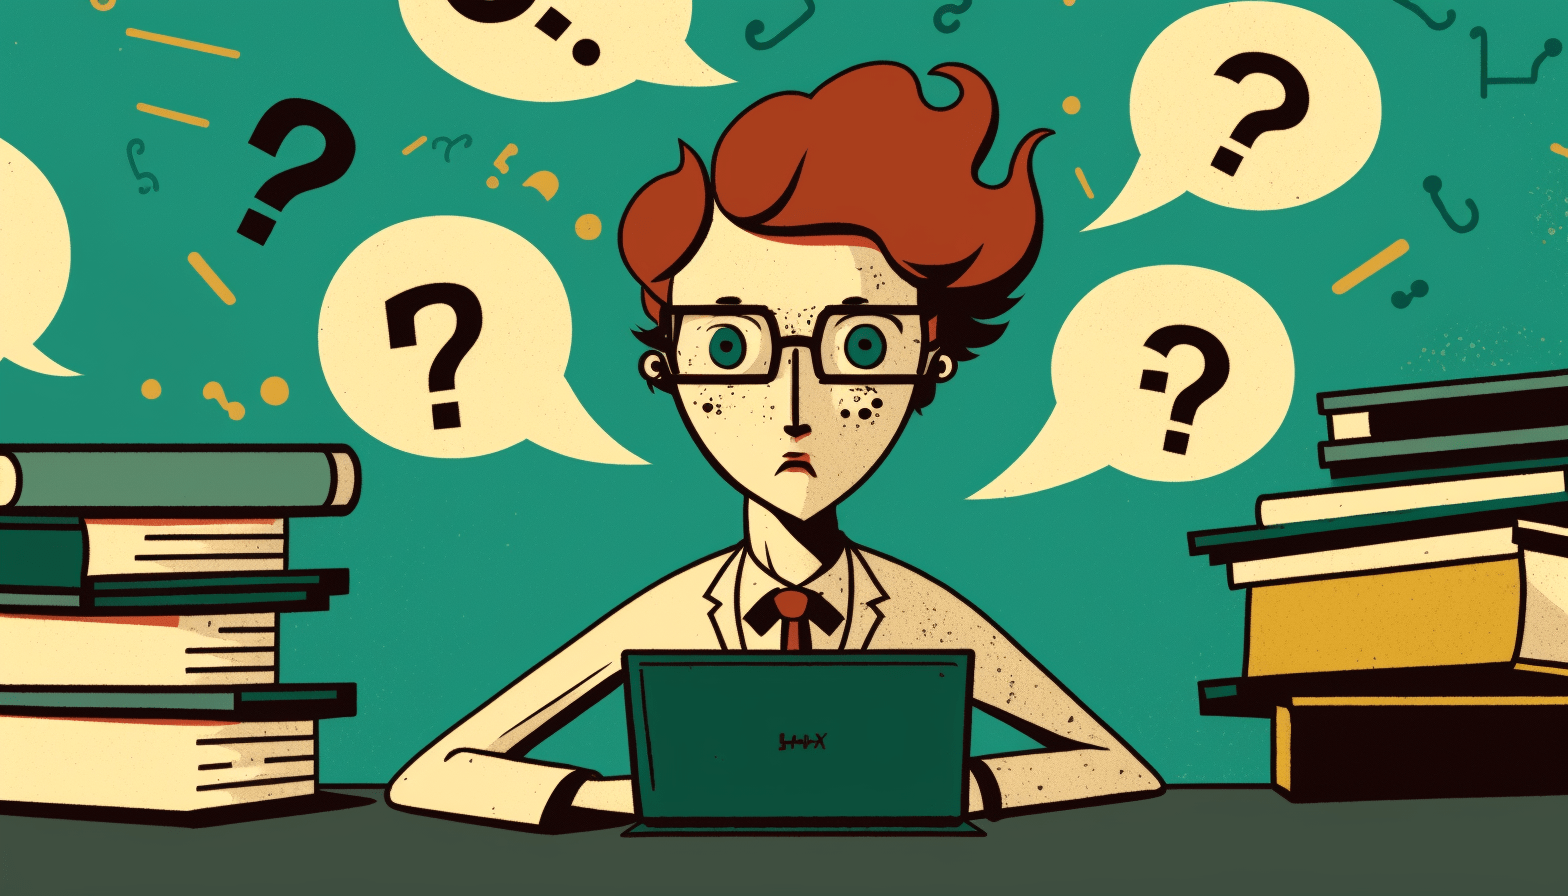 A cartoon image of a person studying with books and a laptop, surrounded by question marks, while a CompTIA certification is depicted as a key to success above them.